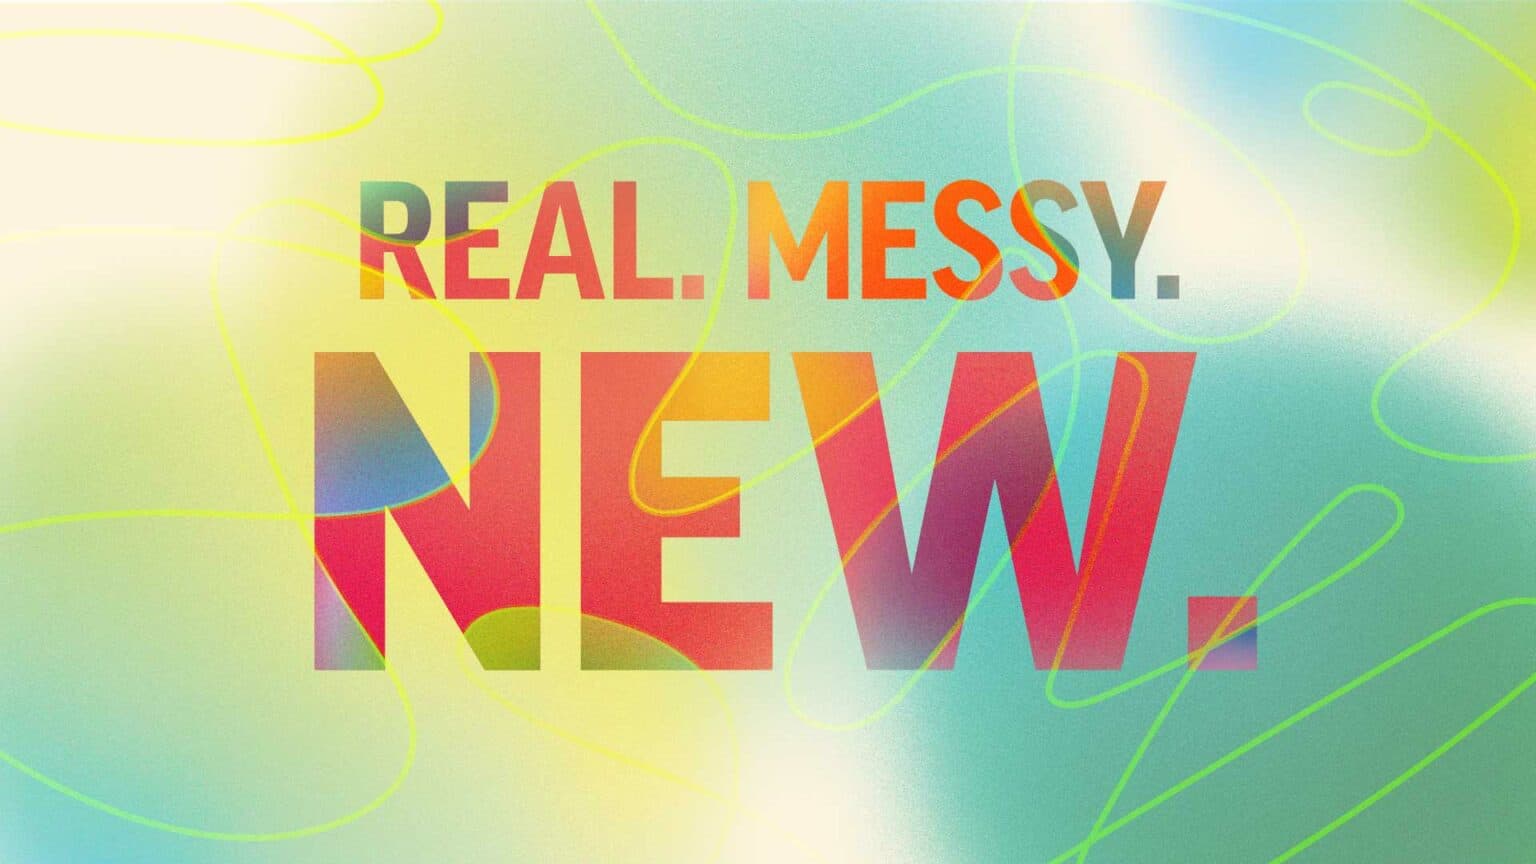 Real. Messy. New.